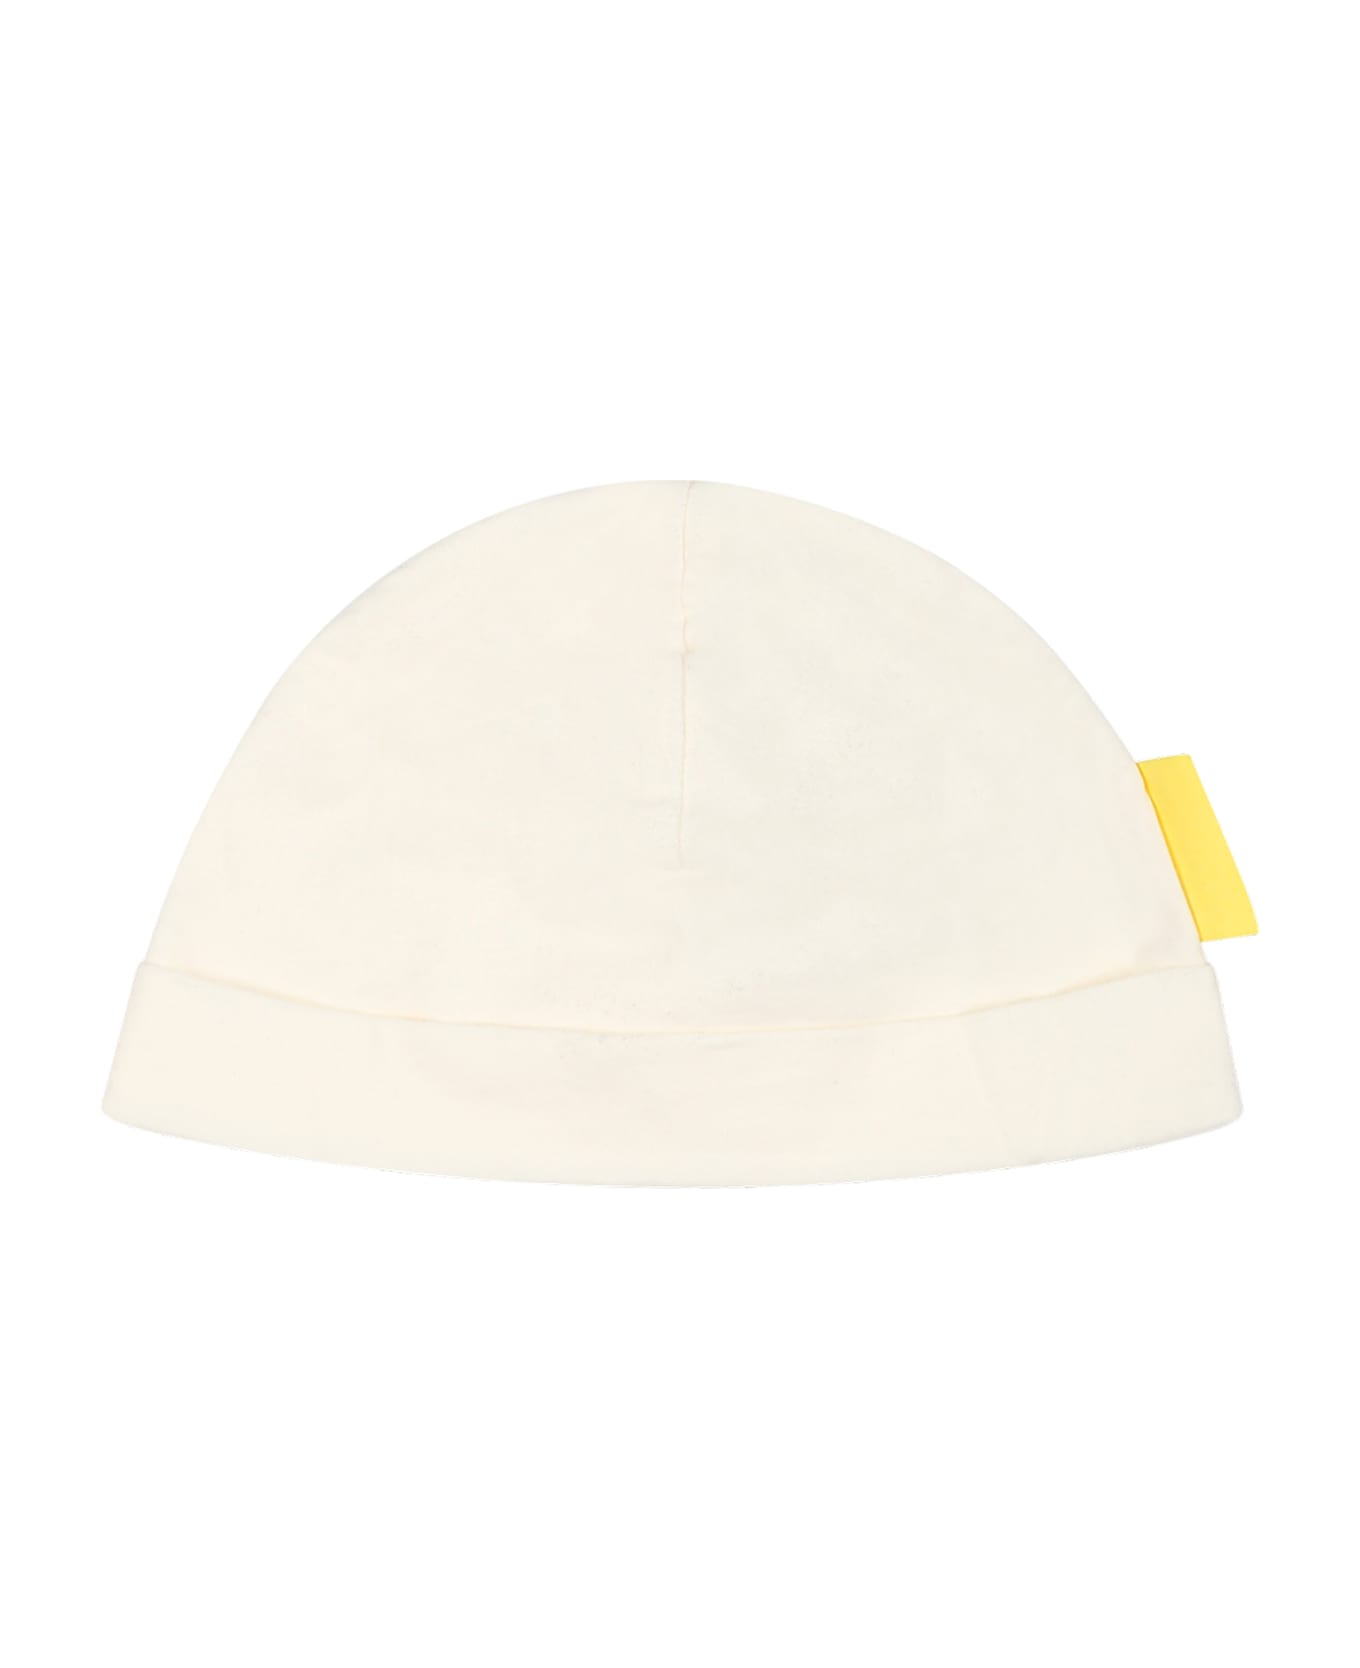 Off-White Ivory Set For Baby Boy - White ボディスーツ＆セットアップ